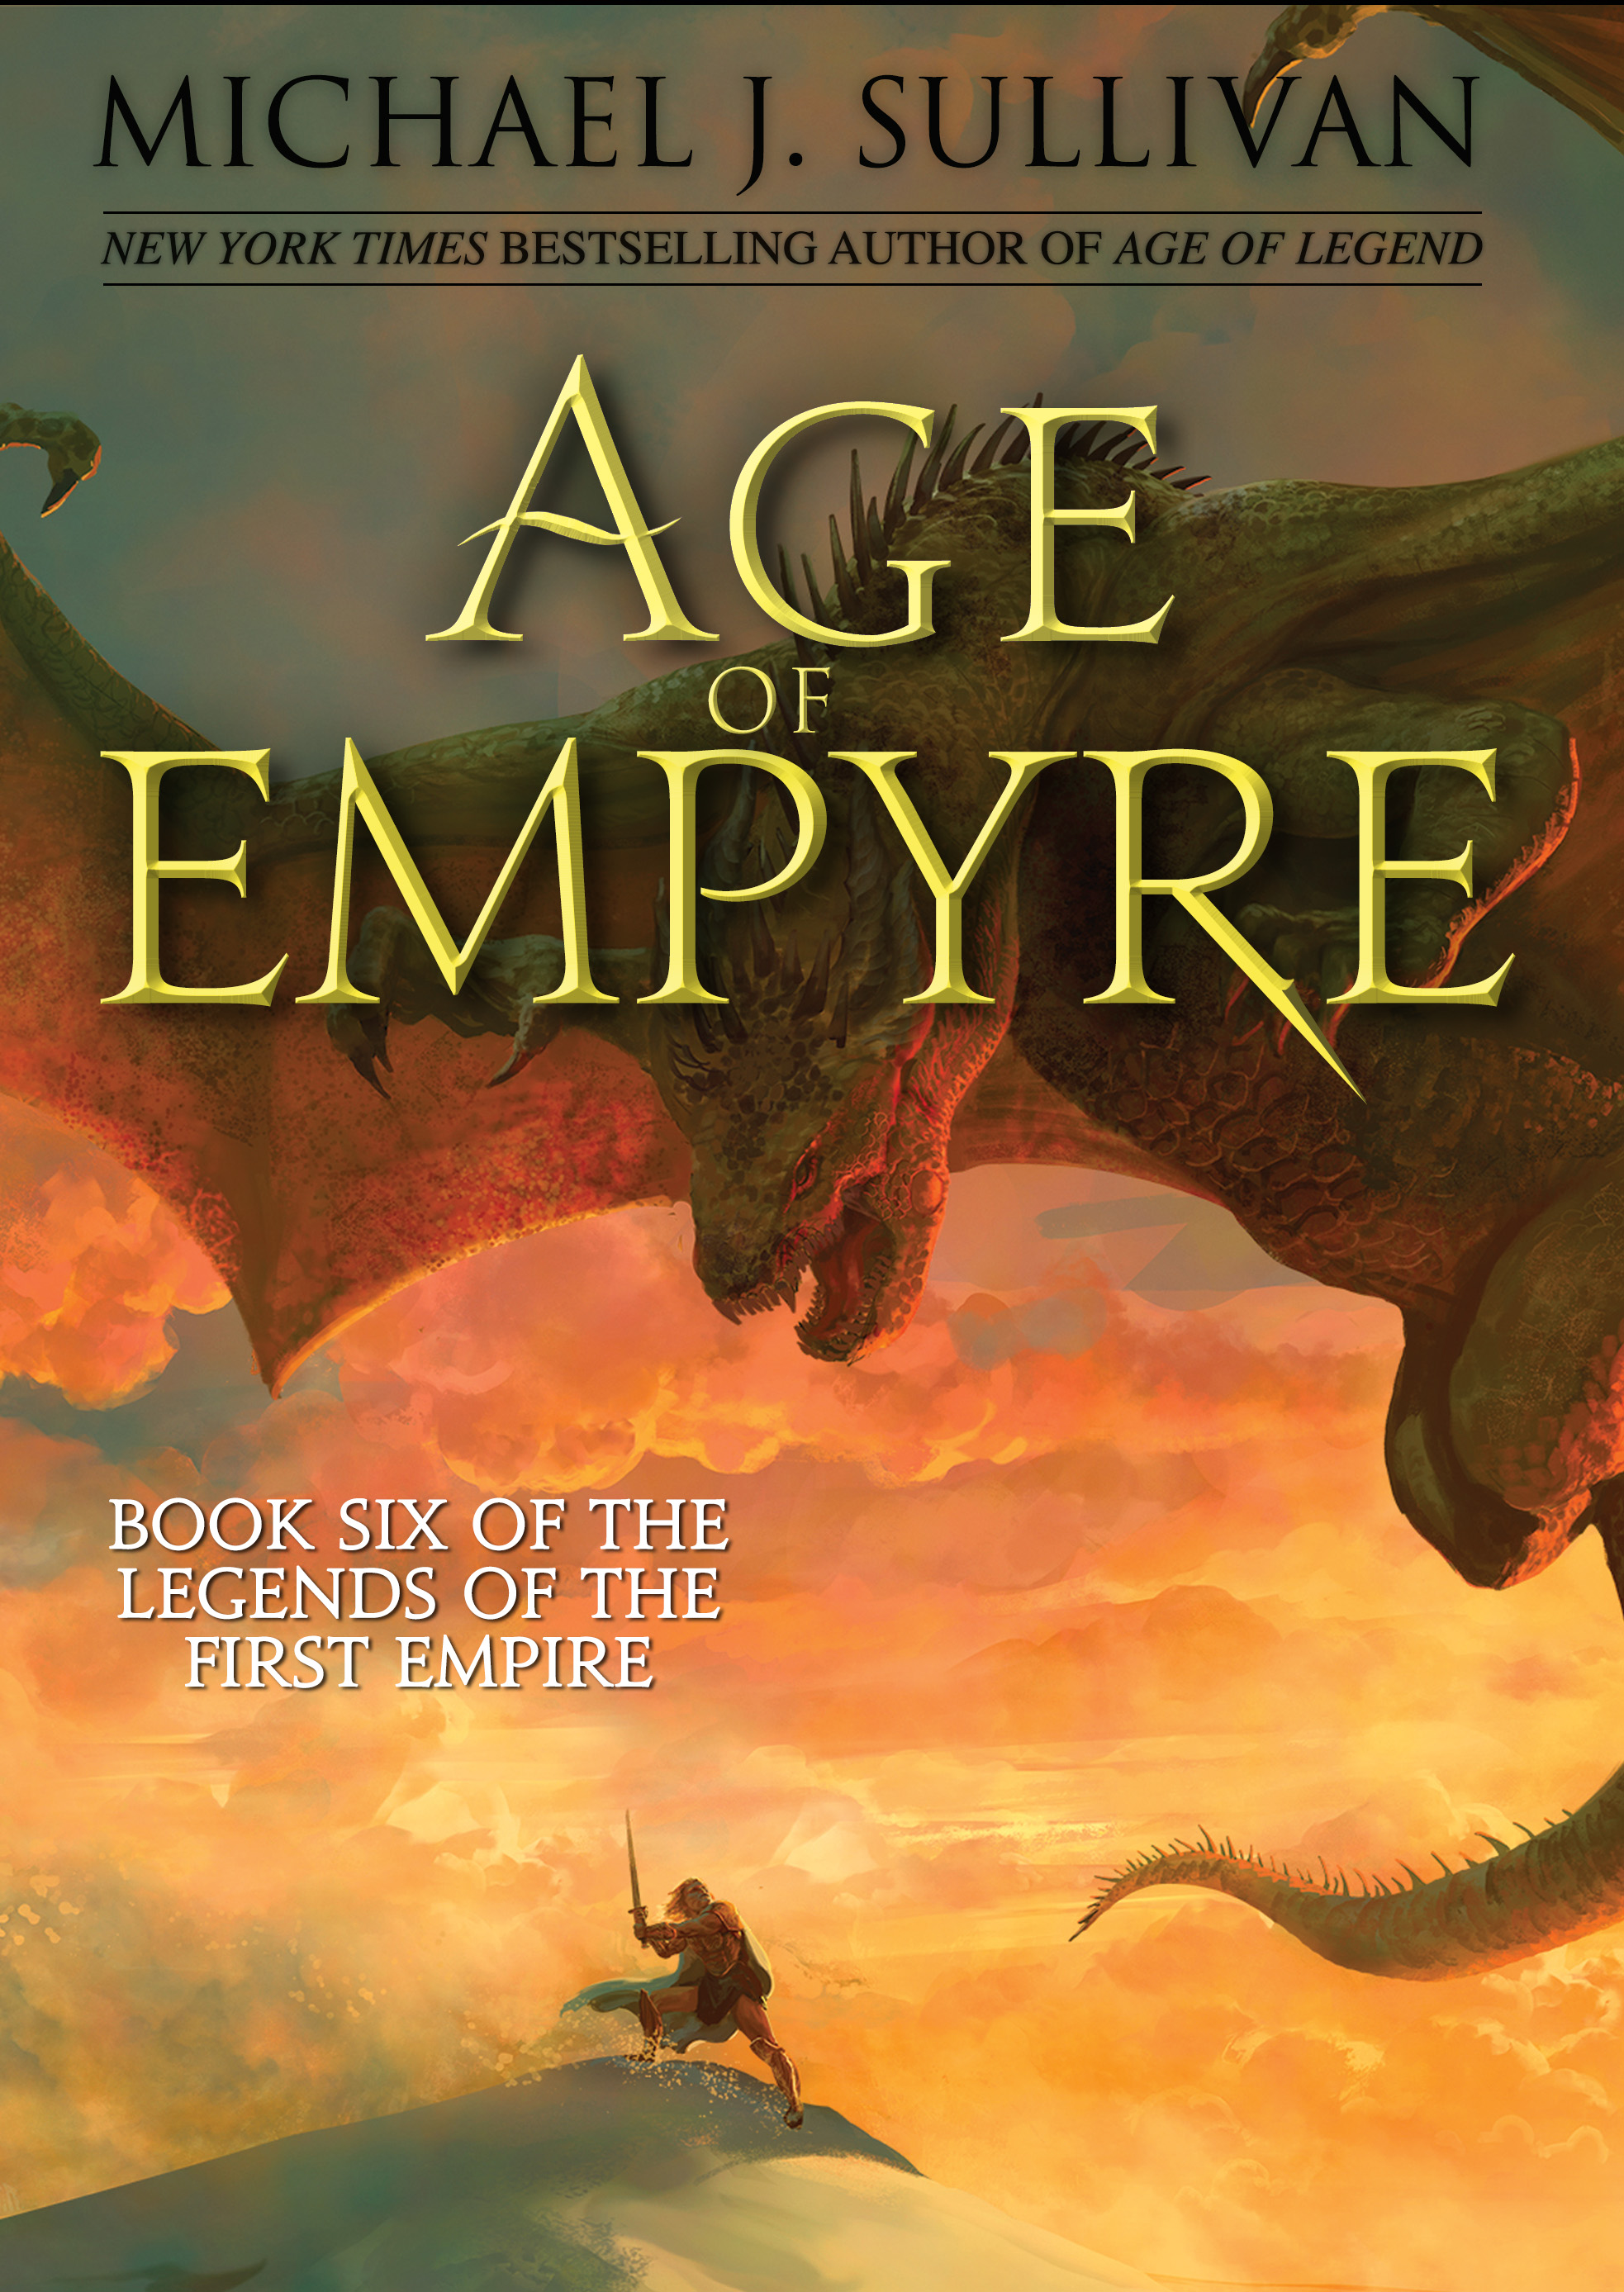 [EPUB] The Legends of the First Empire #6 Age of Empyre by Michael J. Sullivan